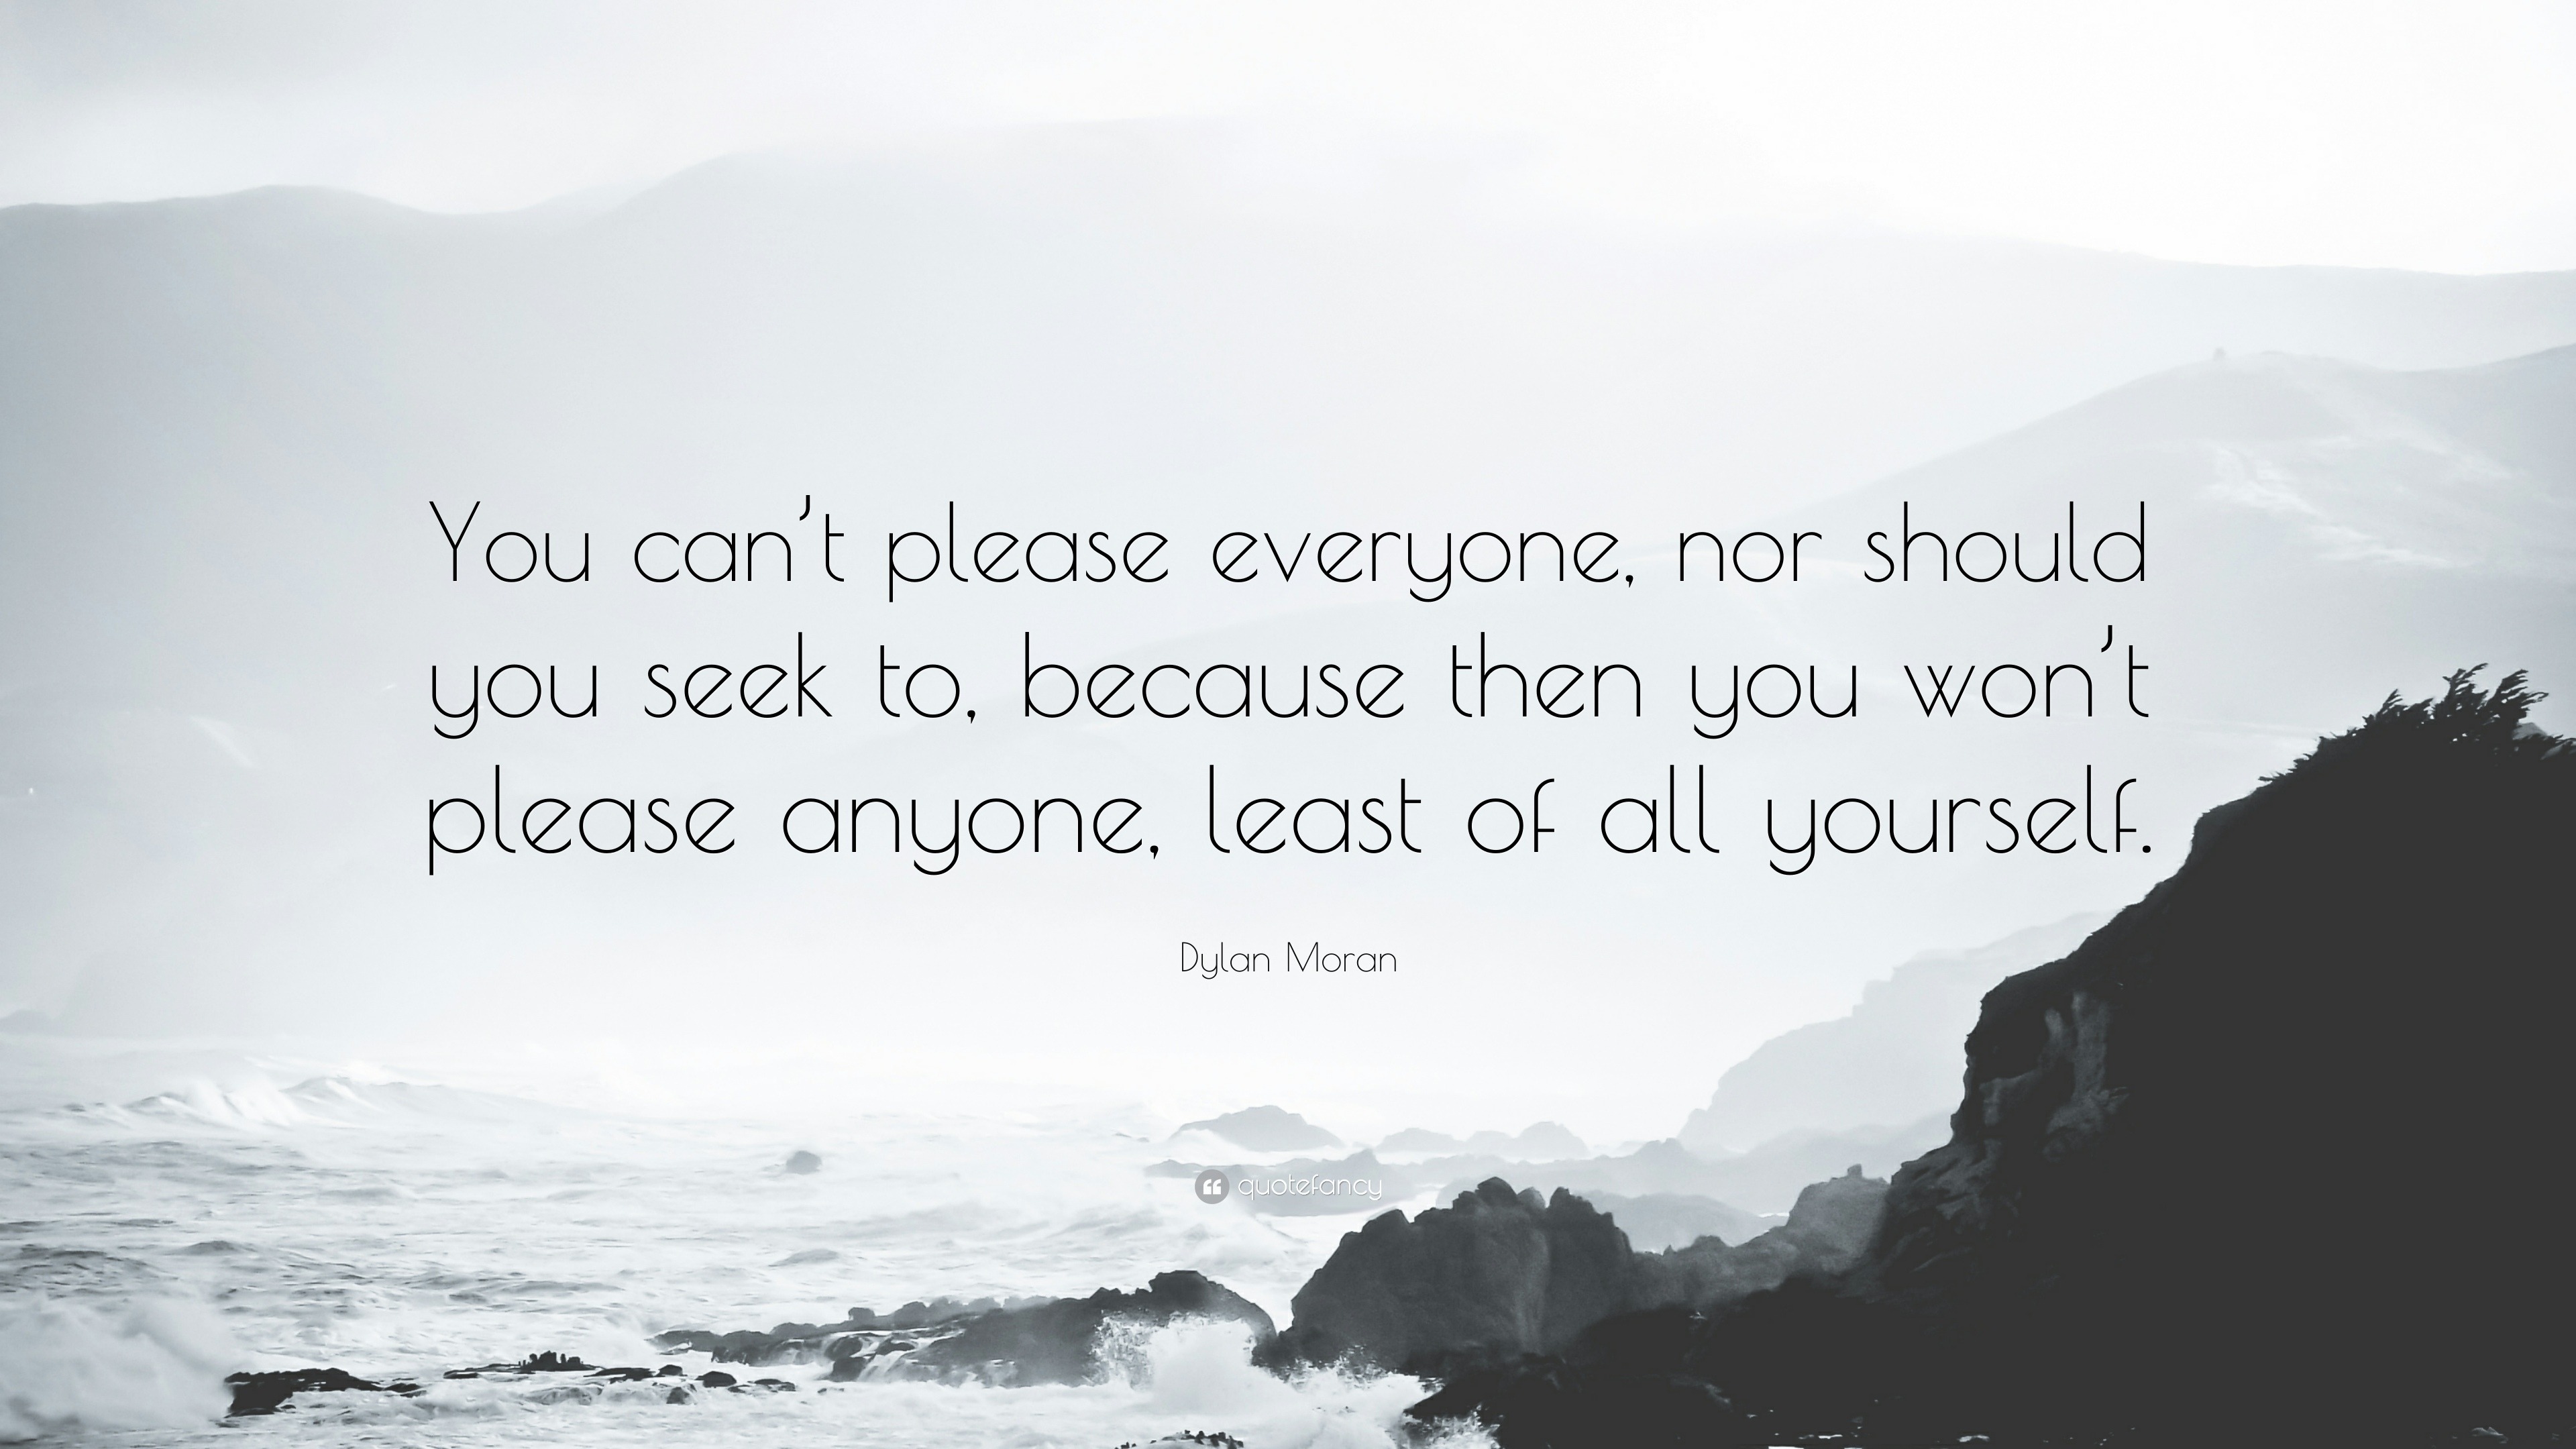 Dylan Moran Quote: “You can't please everyone, nor should you seek